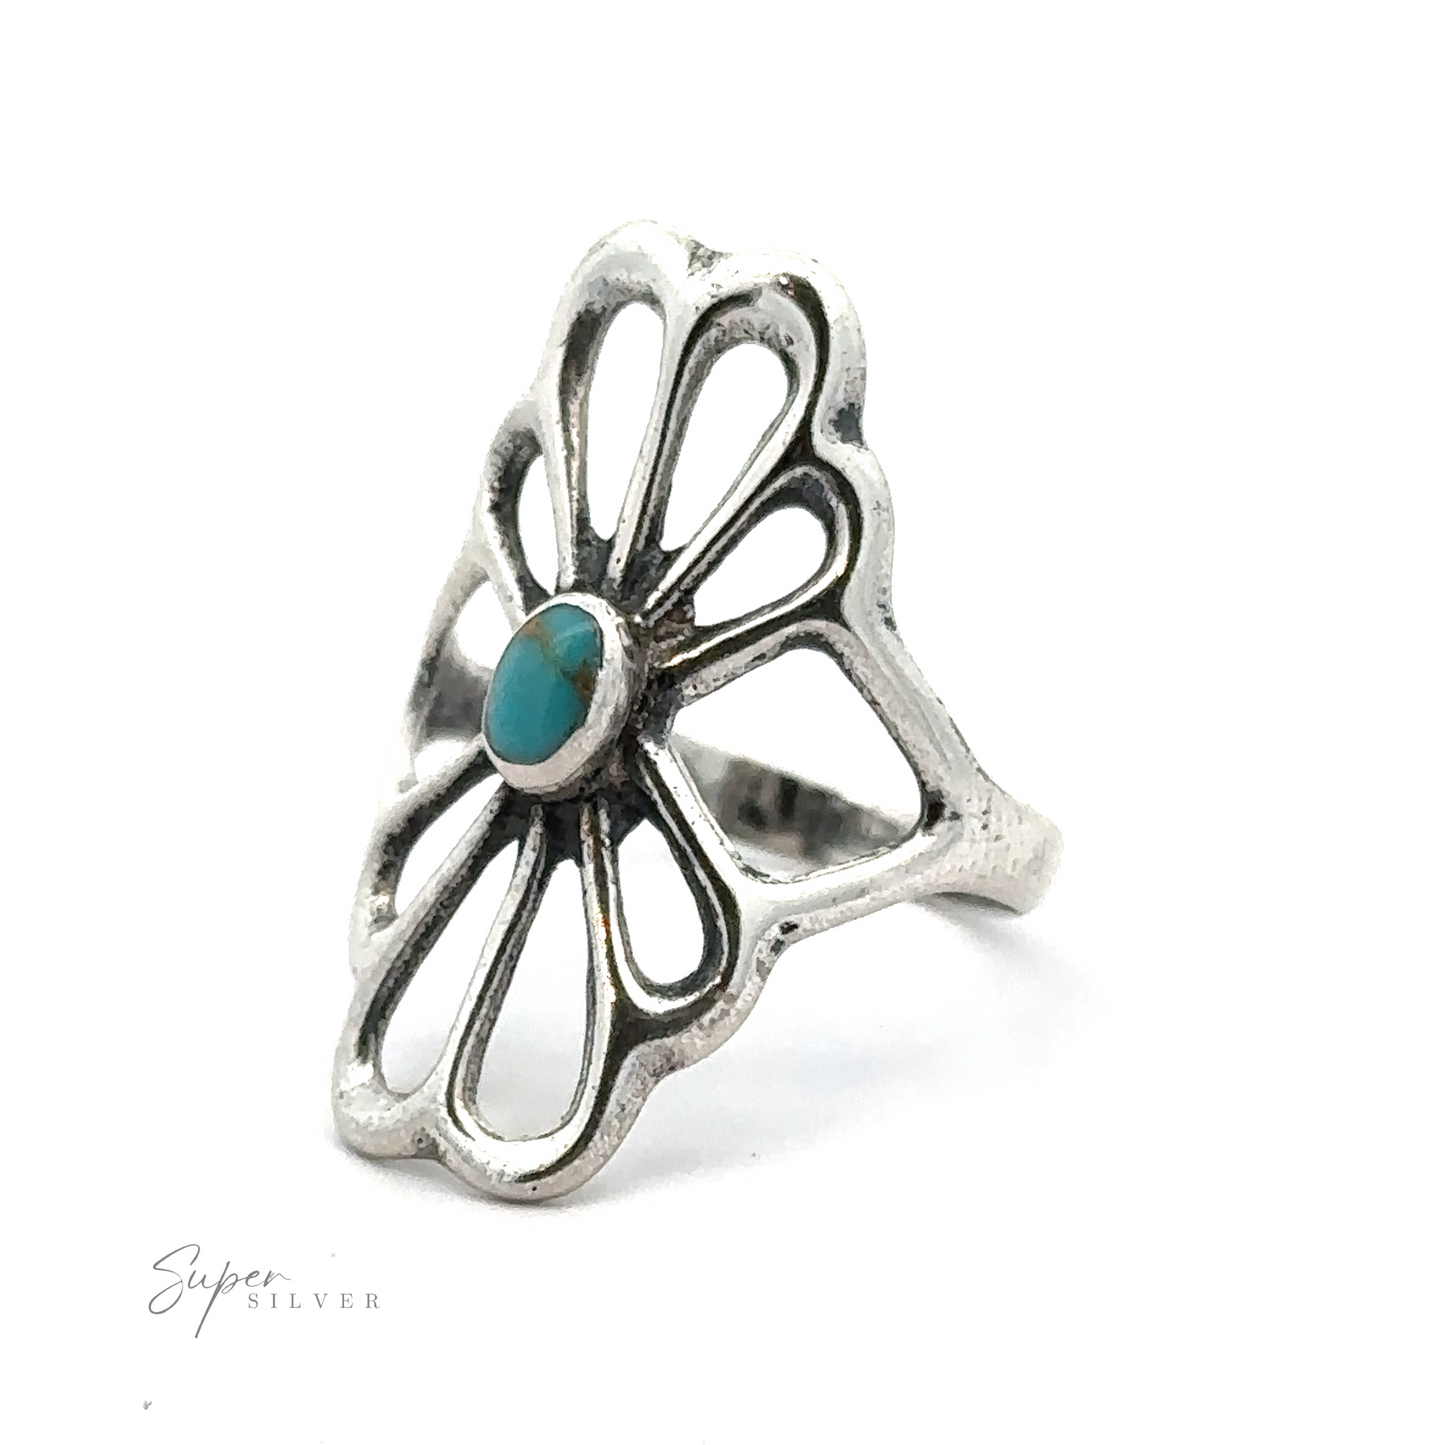 
                  
                    A sterling silver flower design ring with an openwork floral pattern and a small turquoise stone at the center, featuring the text "American Made Flower Ring" on the lower left corner. Handcrafted in America.
                  
                